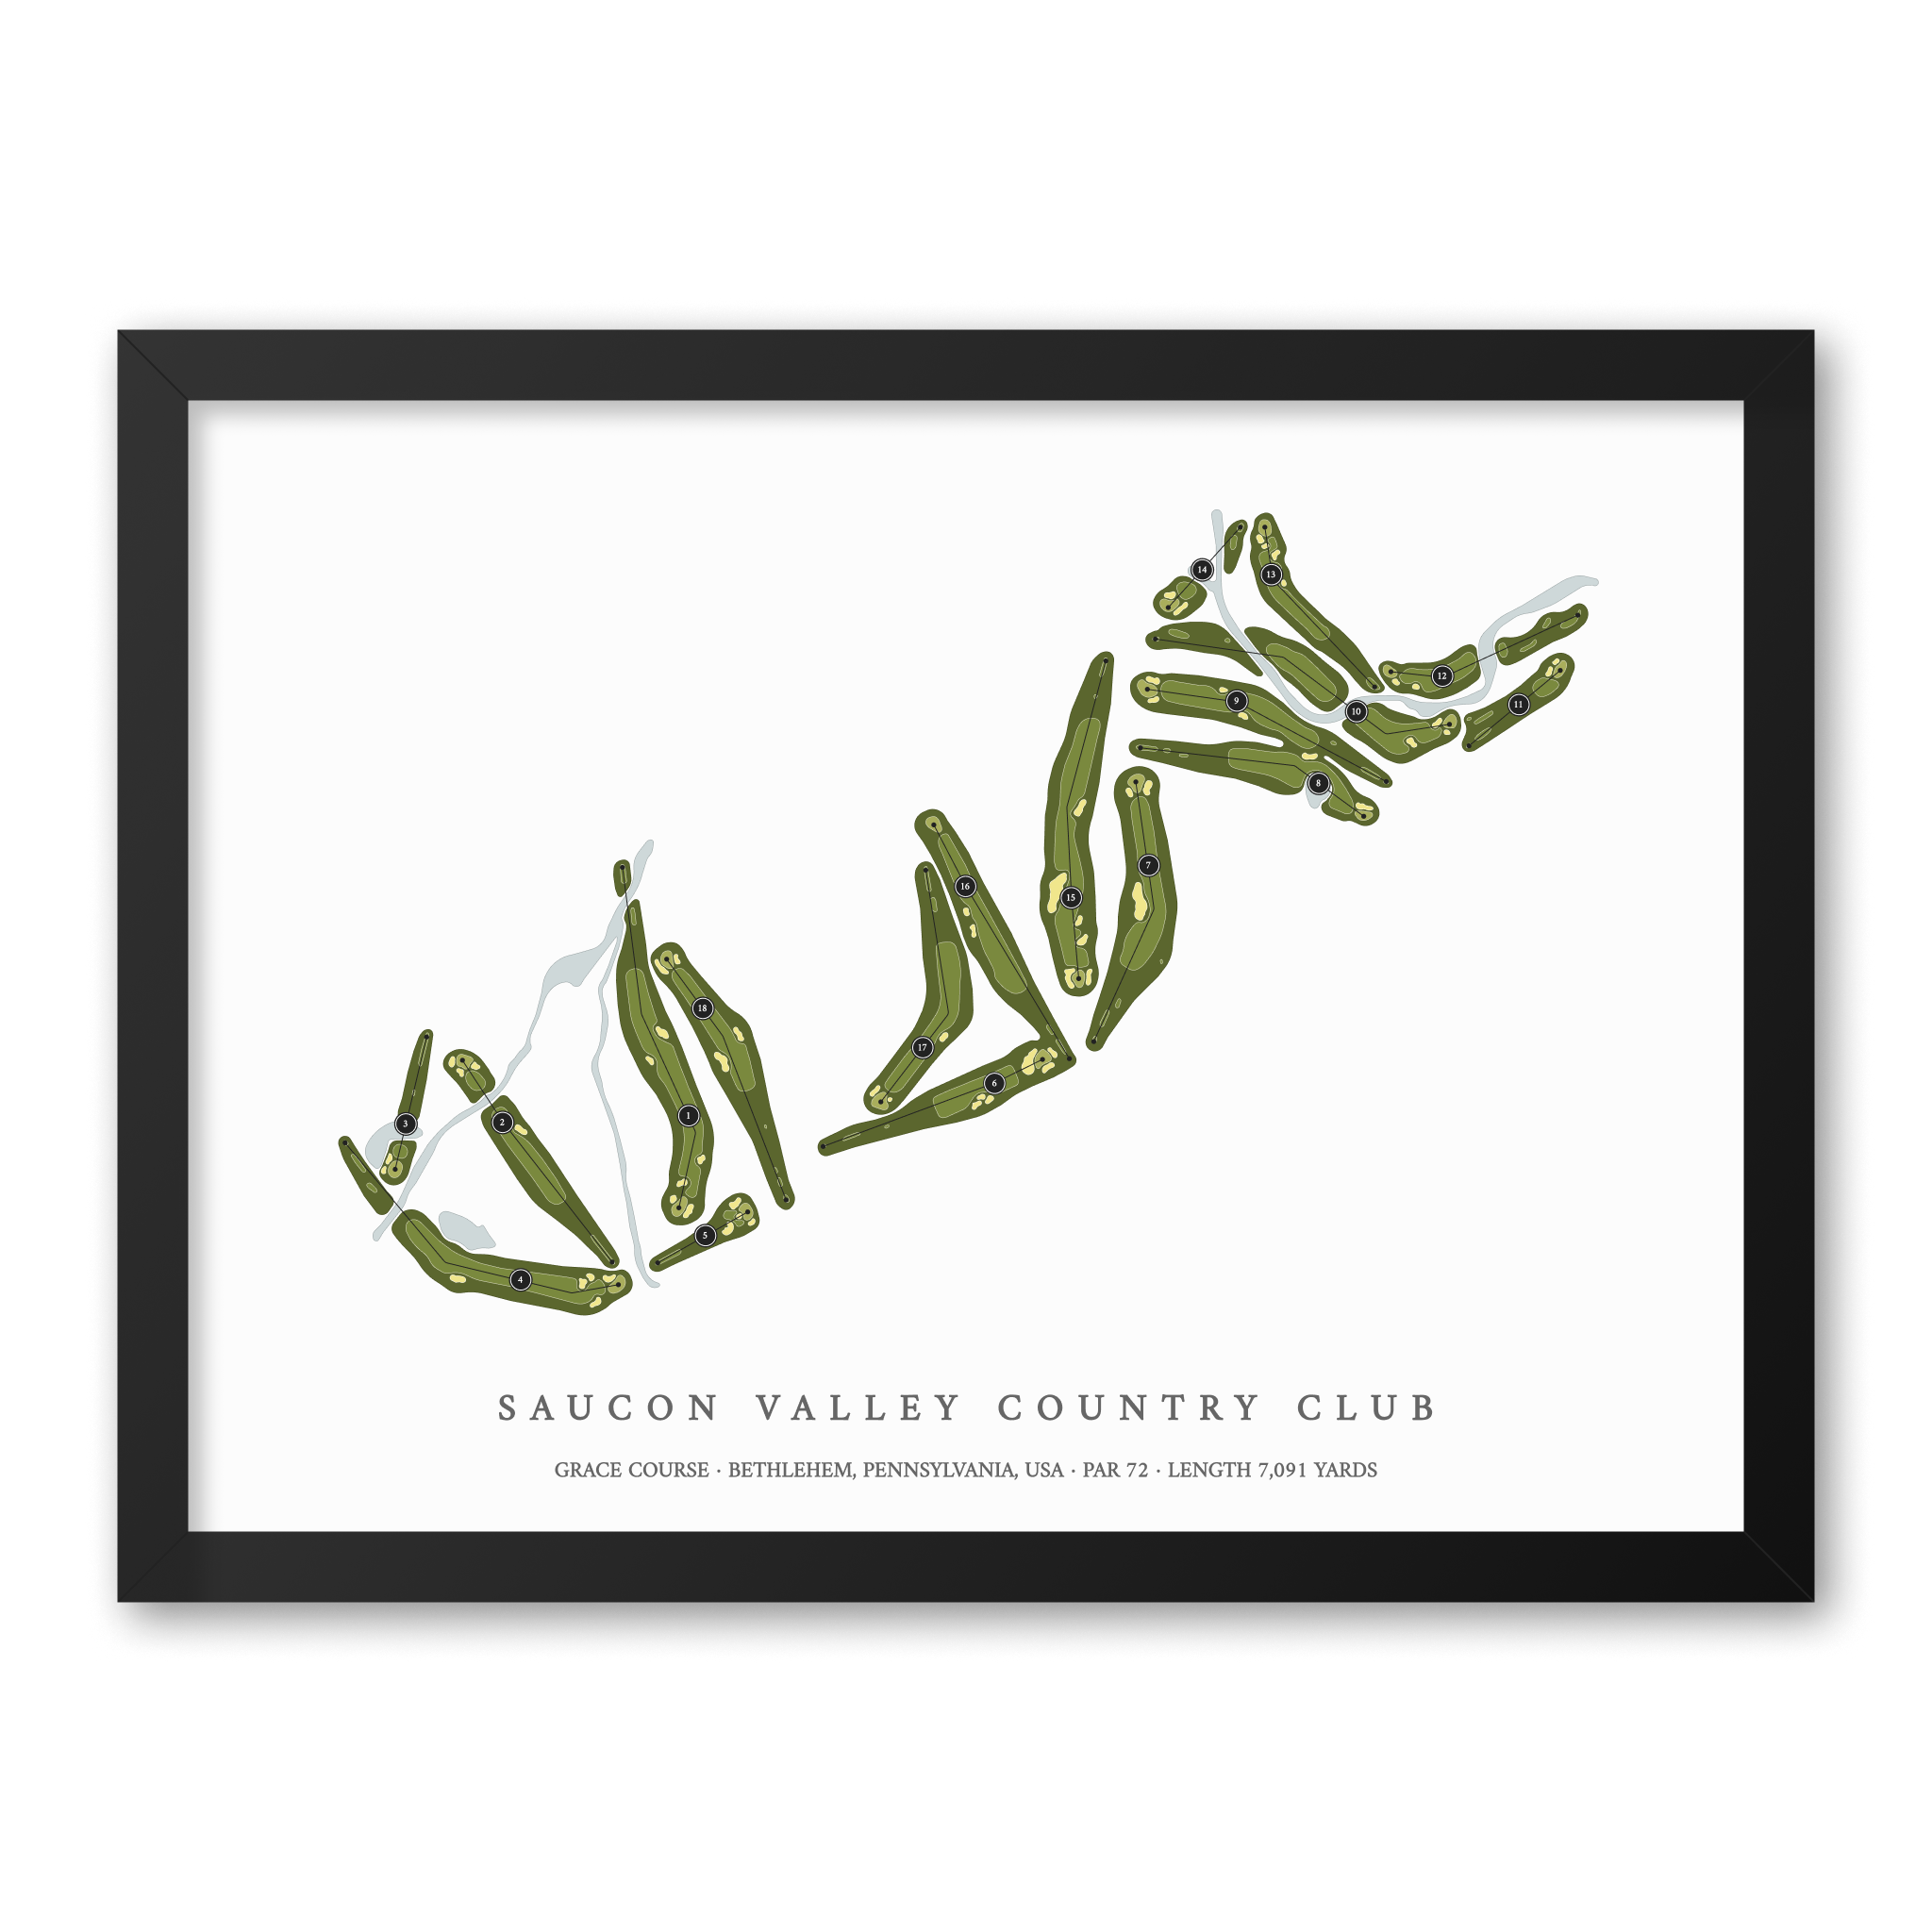 Saucon Valley Country Club - Grace Course | Golf Course Map | Black Frame With Hole Numbers #hole numbers_yes